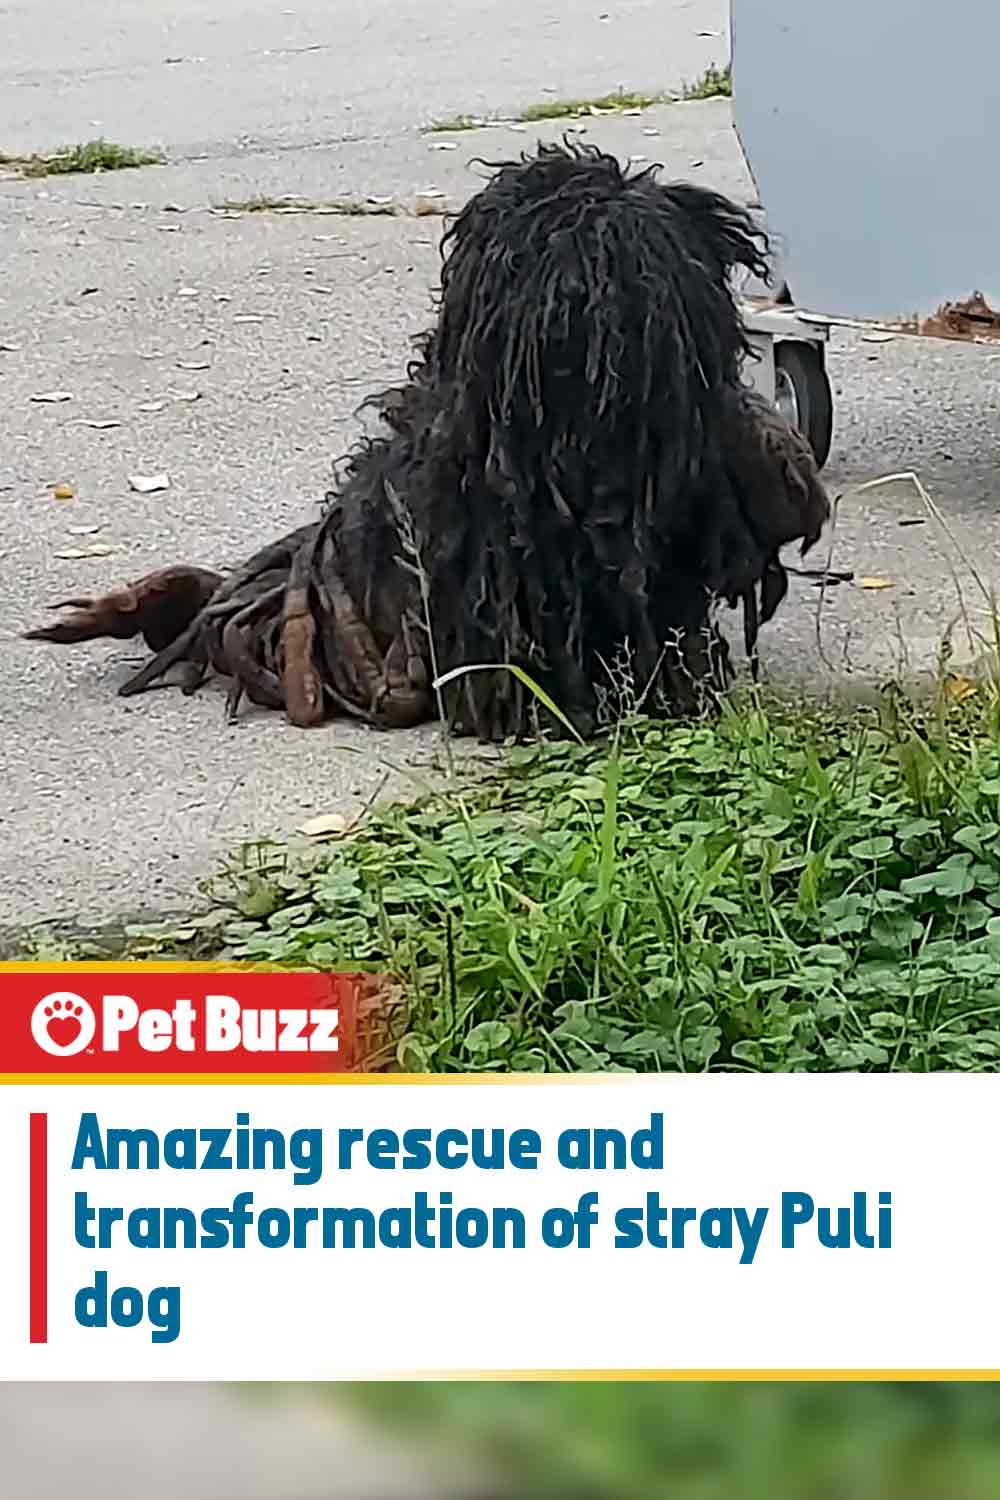 Amazing rescue and transformation of stray Puli dog